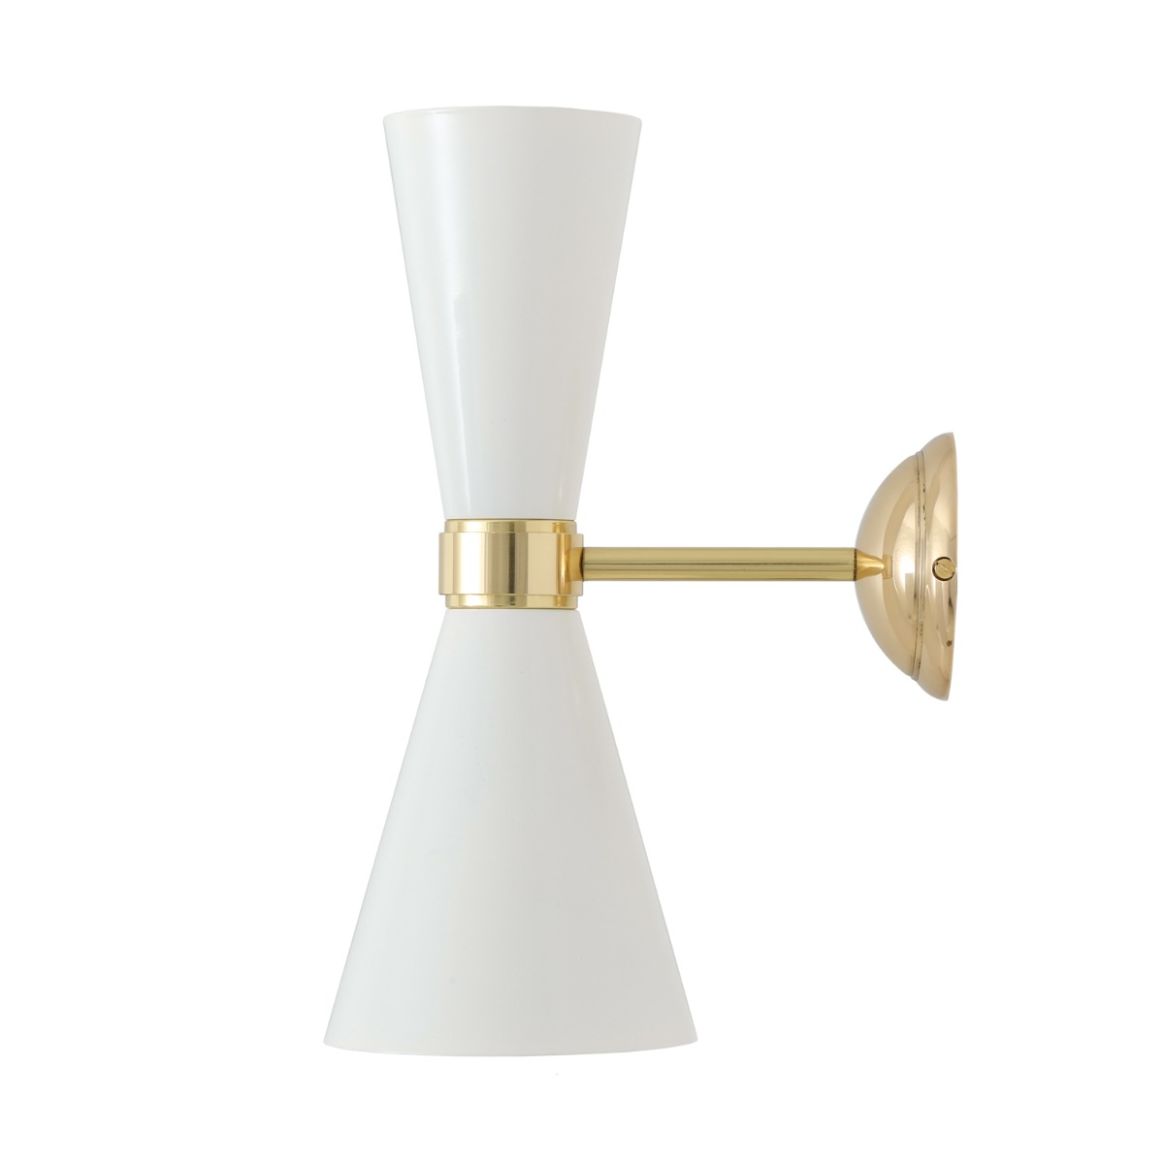 Roger Pradier Avenue 2 Model 2 LED Wall Light with Opal PMMA - Brass